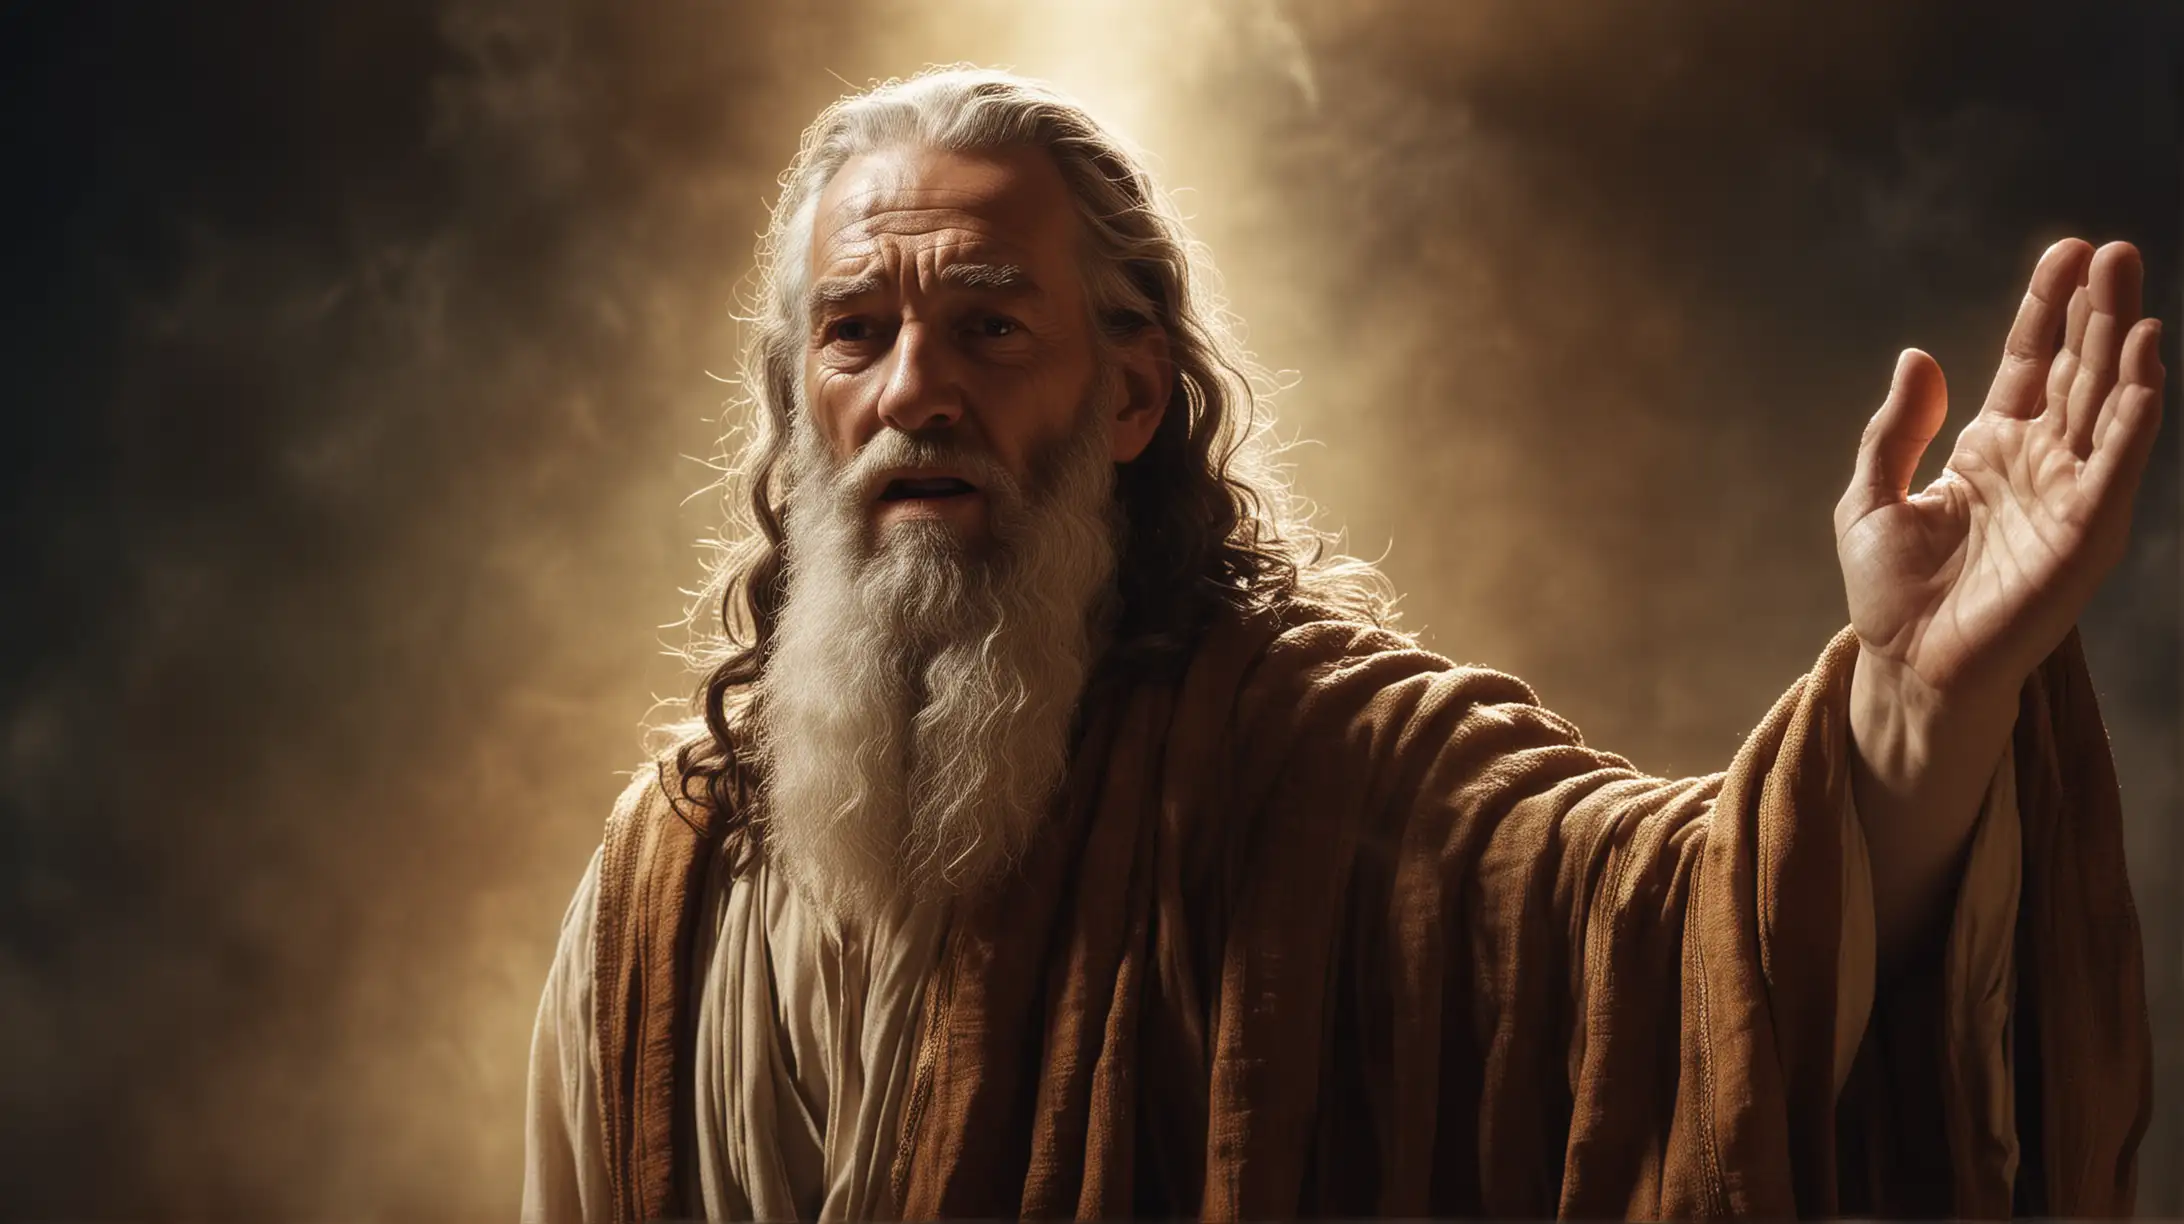 Moses after receiving the 10 commandments from God, his face  isglowing.  Set during the era of the Biblical Moses.